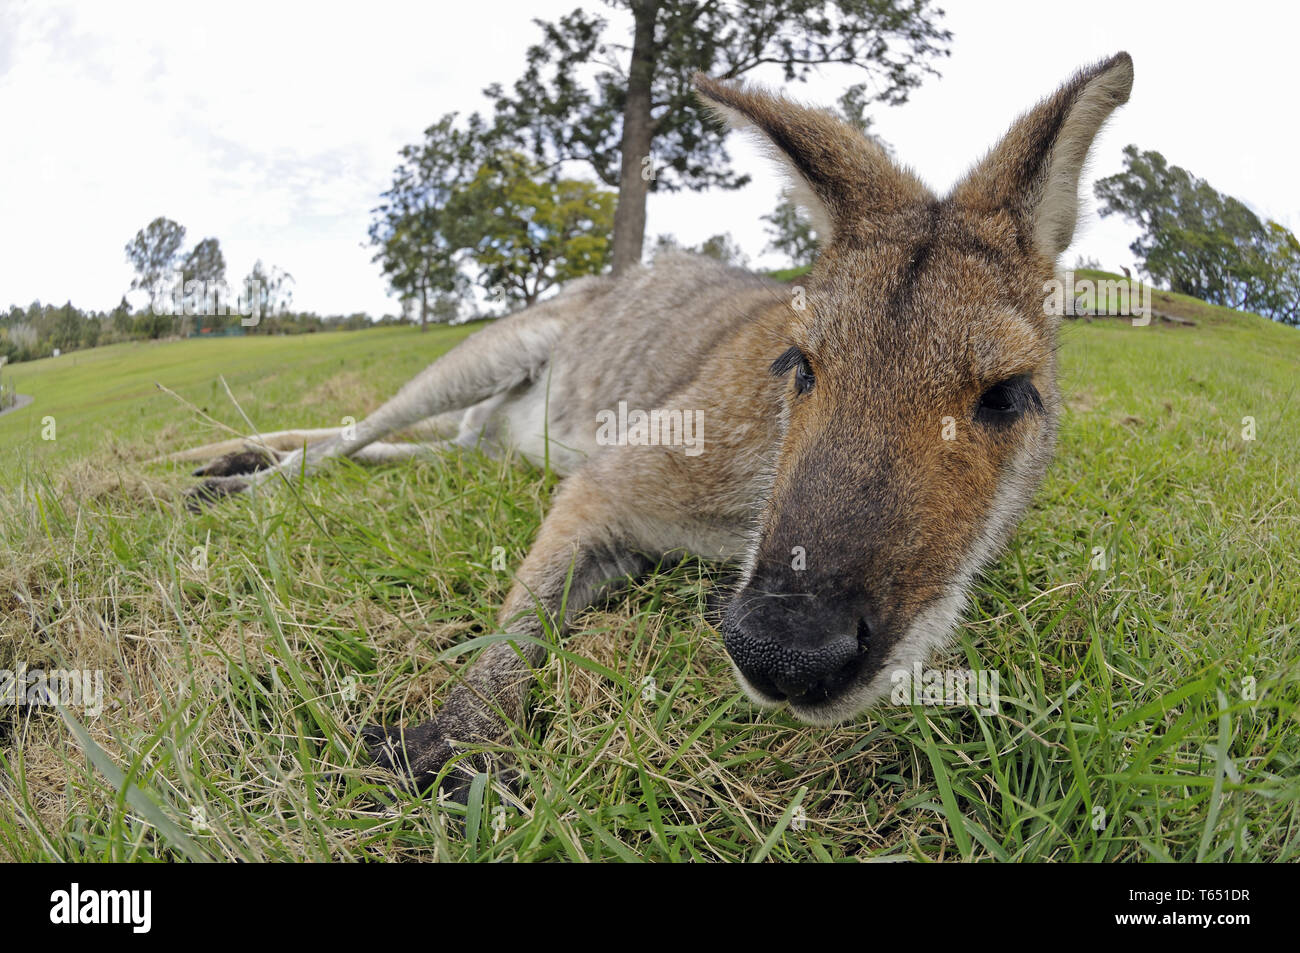 red-necked wallaby or Bennett's wallaby (Macropus rufogriseus) Stock Photo